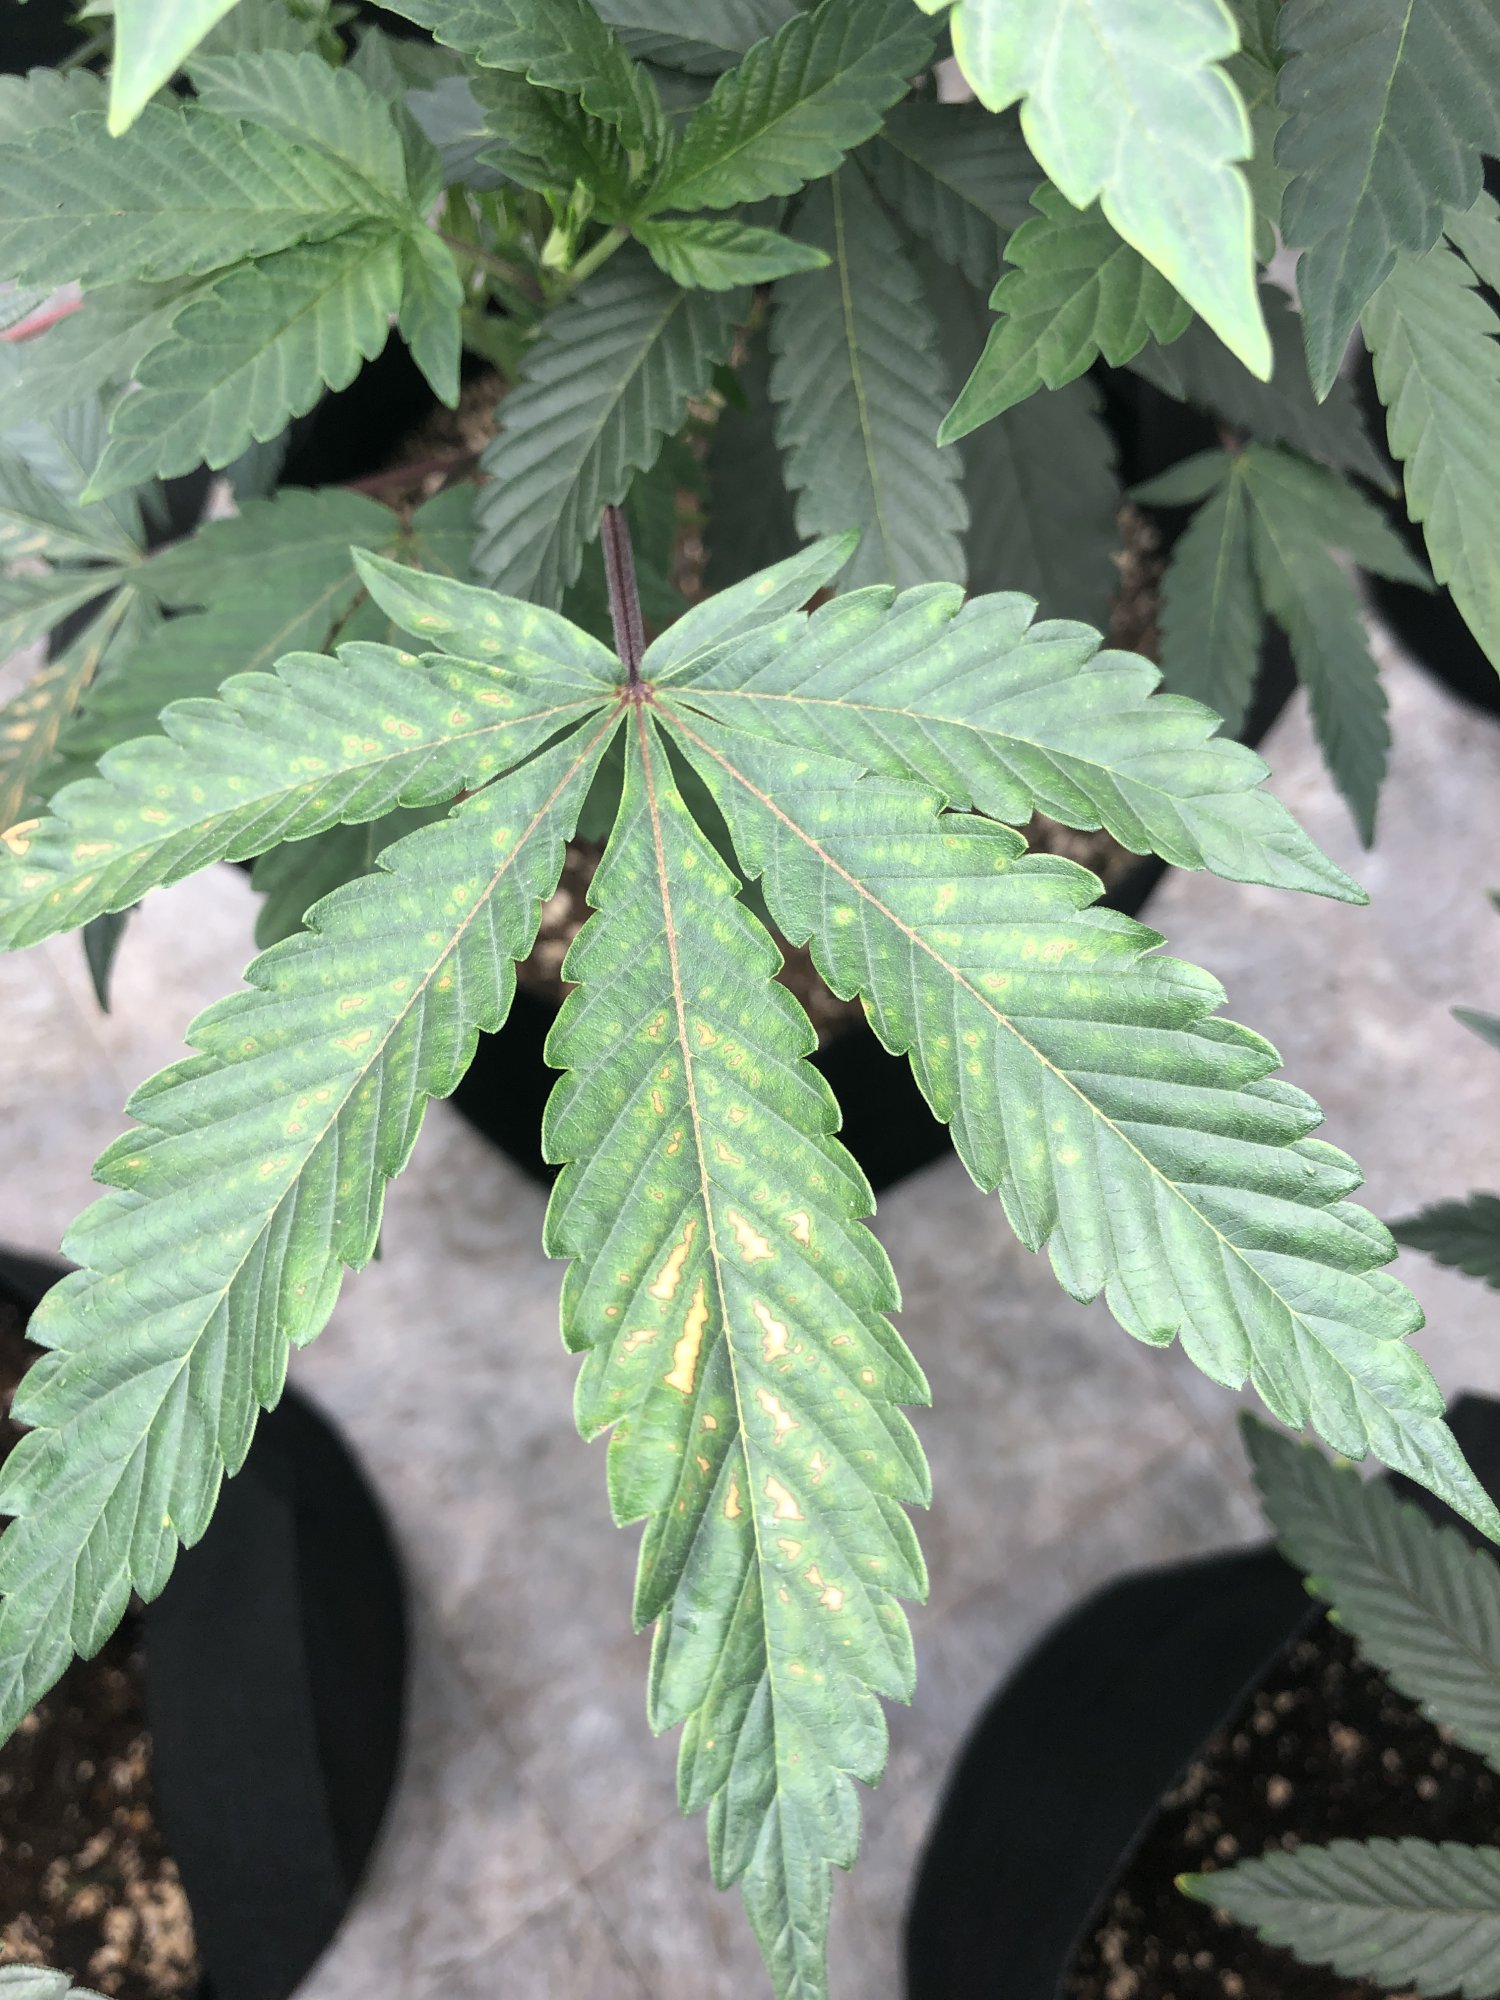 Could this be cal mag deficiency 2